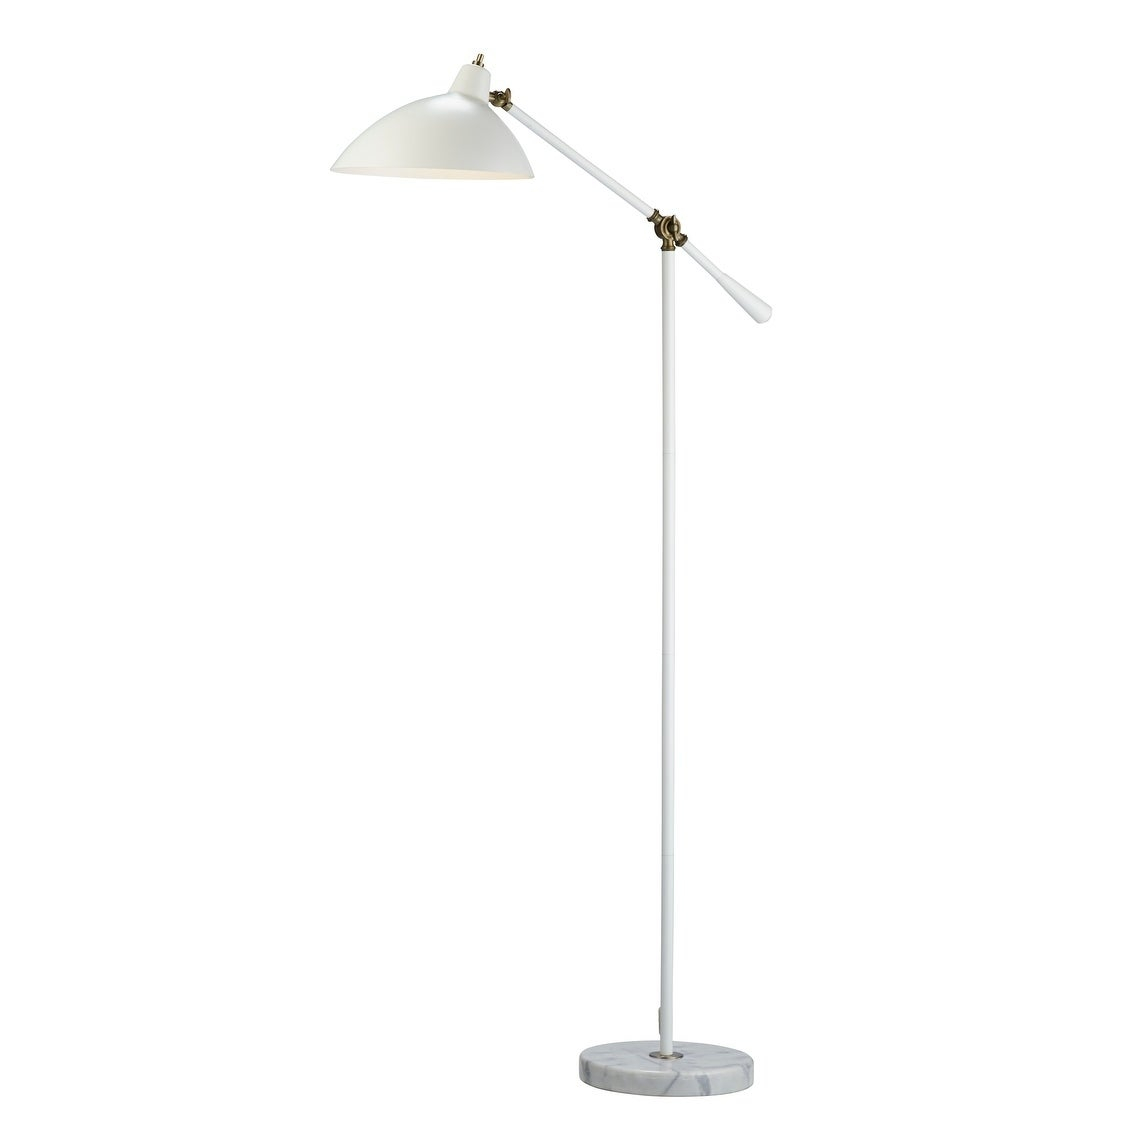 Strick Bolton Kellen Adjustable White Floor Lamp With Marble Base inside proportions 1122 X 1122